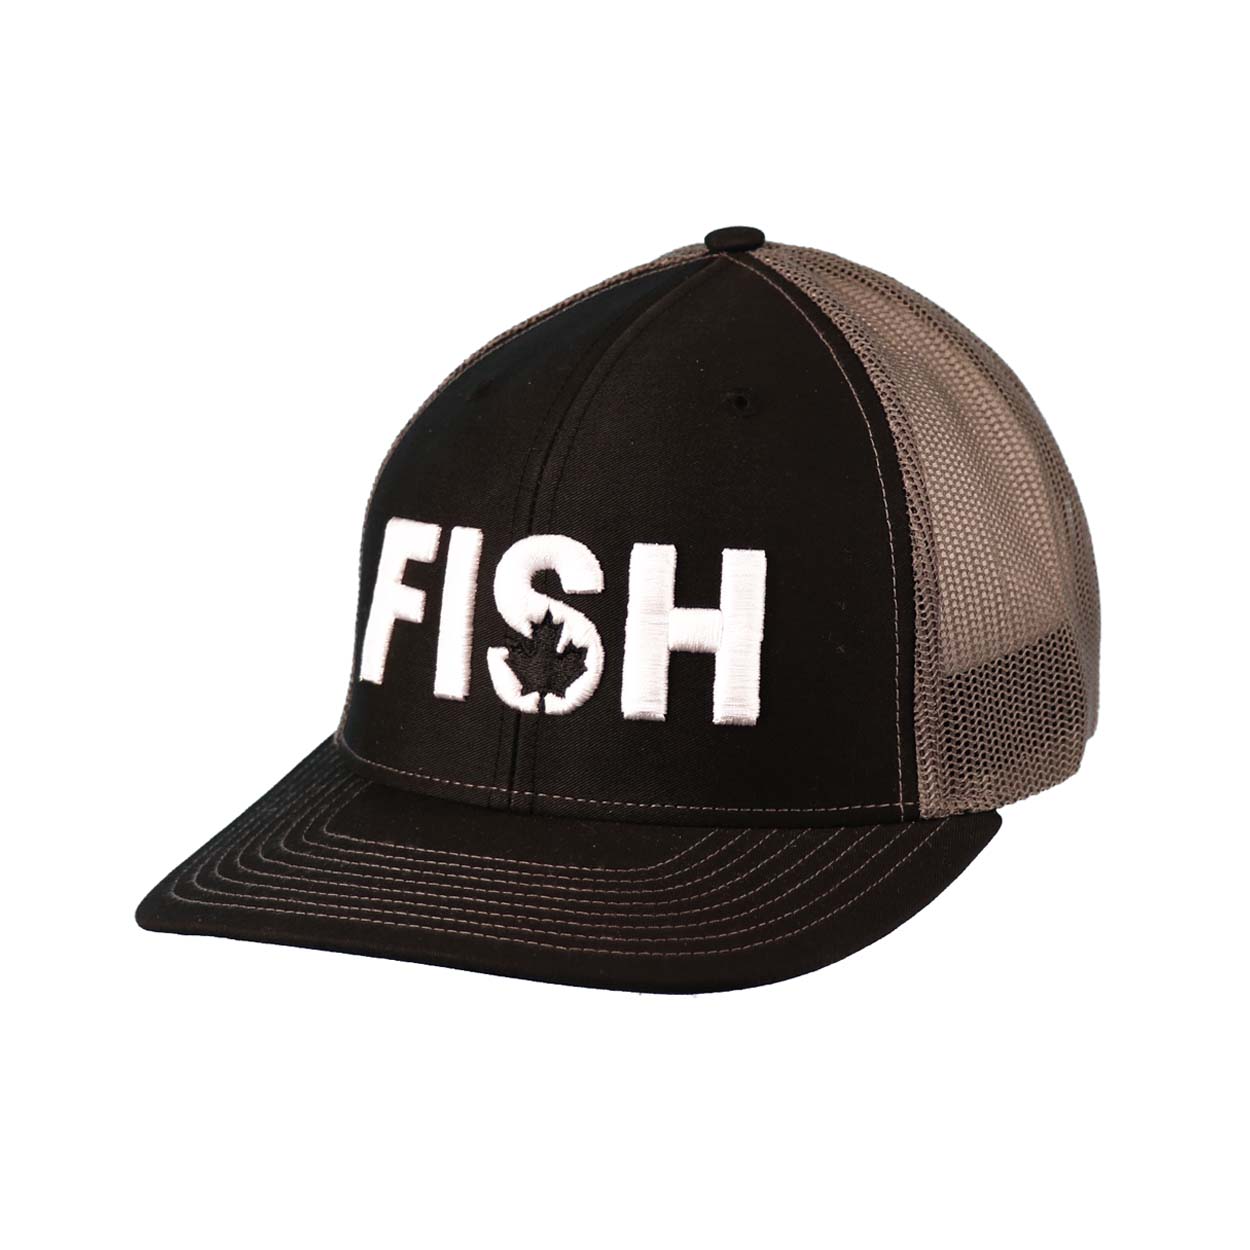 Fish Canada Classic Pro 3D Puff Embroidered Snapback Trucker Hat Black/Gray